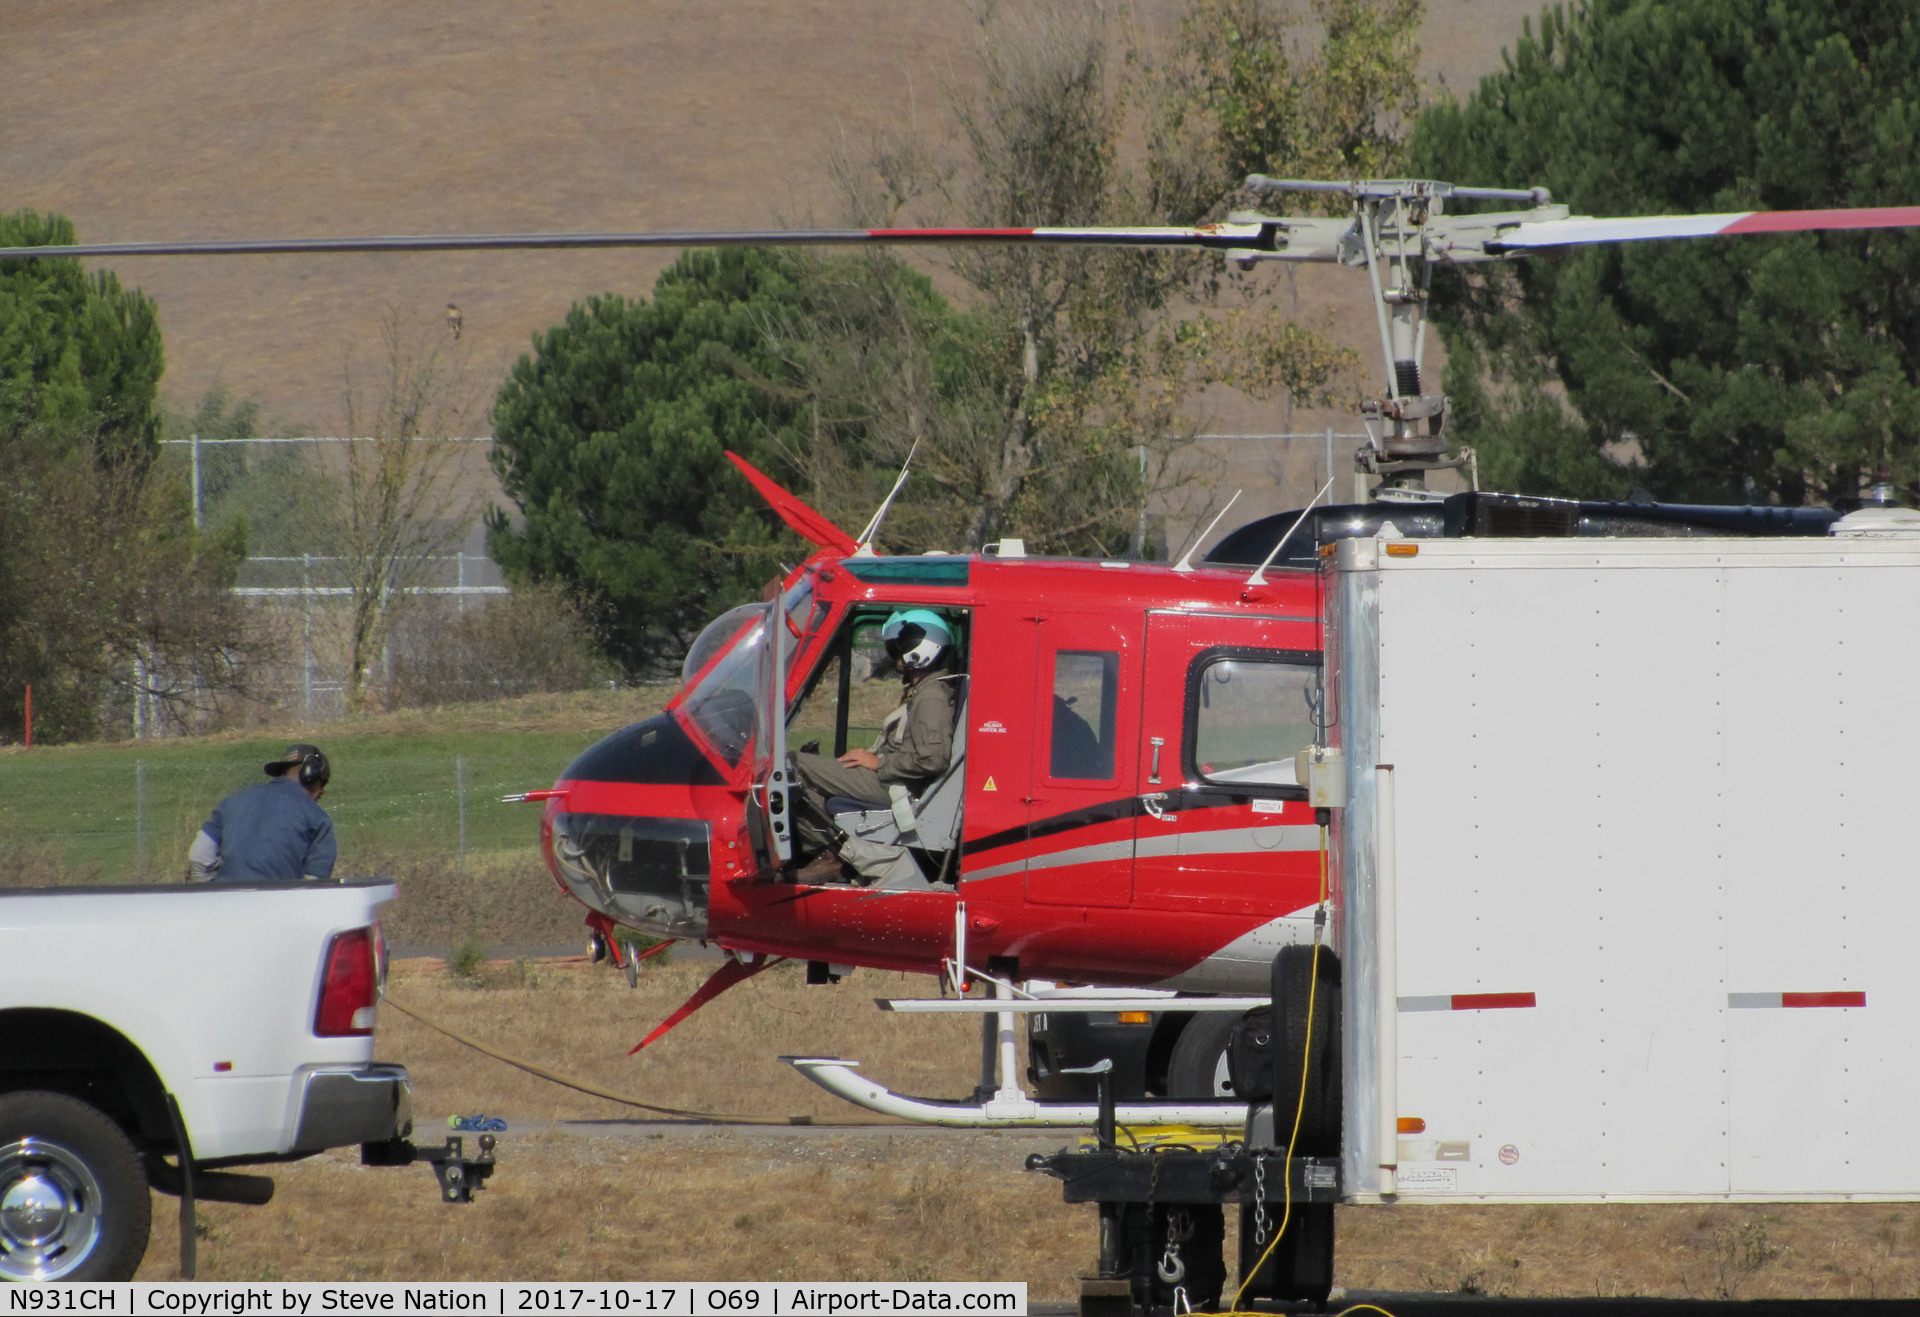 N931CH, 1972 Bell 205A-1 C/N 30110, Pilot of Heligroup Fire LLC (Missoula, MT) shutting down 1972 Bell 205A-1 after returning to Petaluma Municipal Airport, CA temporary home base from making water drops on the devastating October 2017 Northern California wildfires